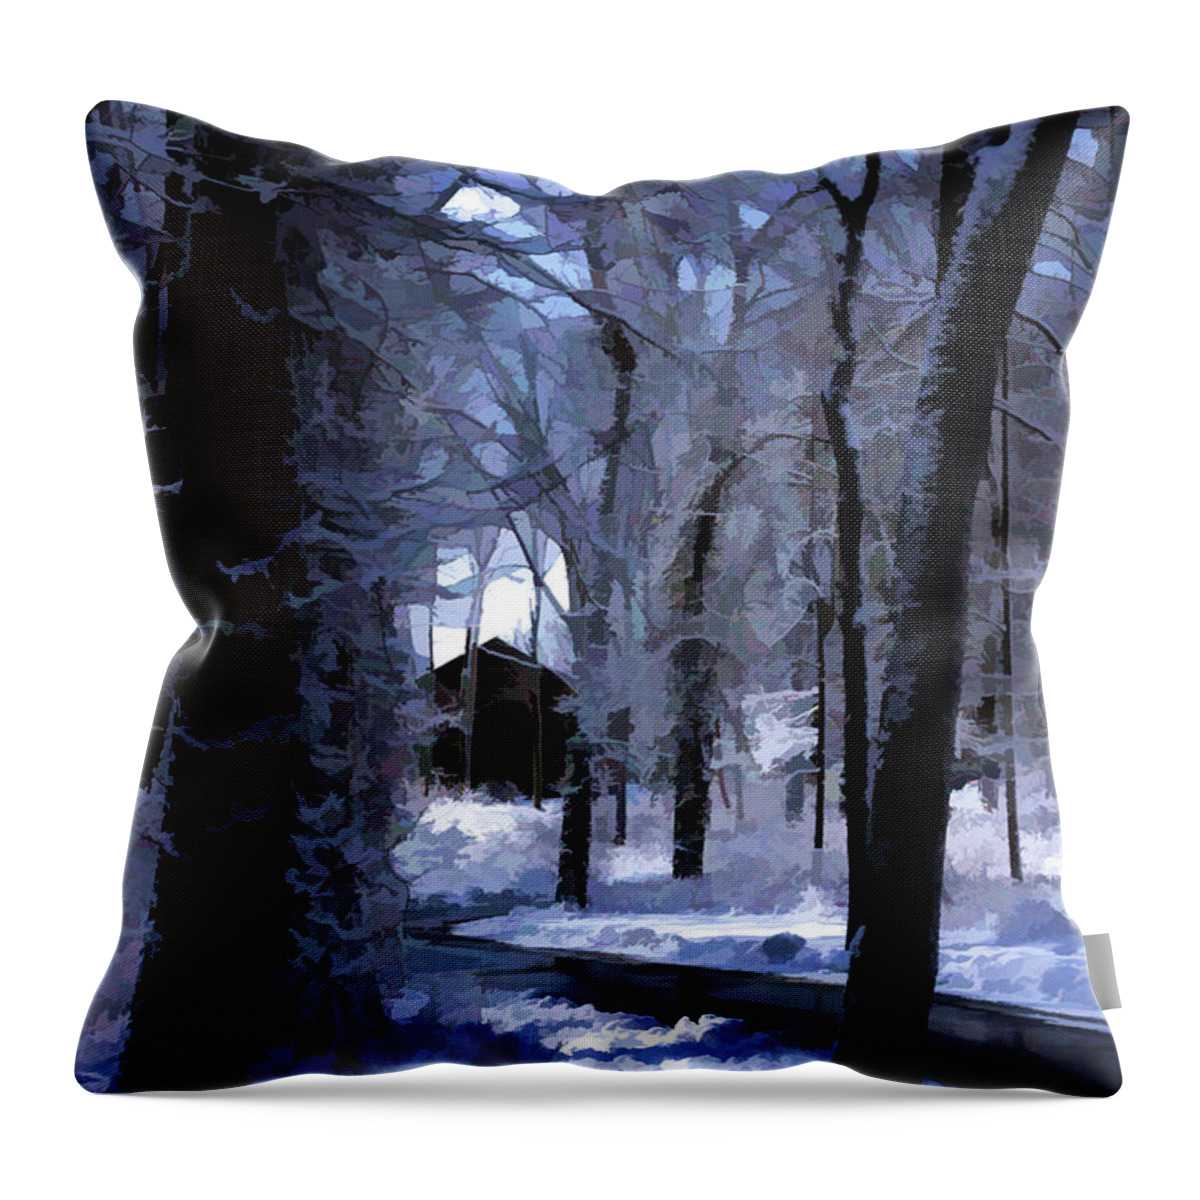 Winter Throw Pillow featuring the digital art Around the Corner by Xine Segalas